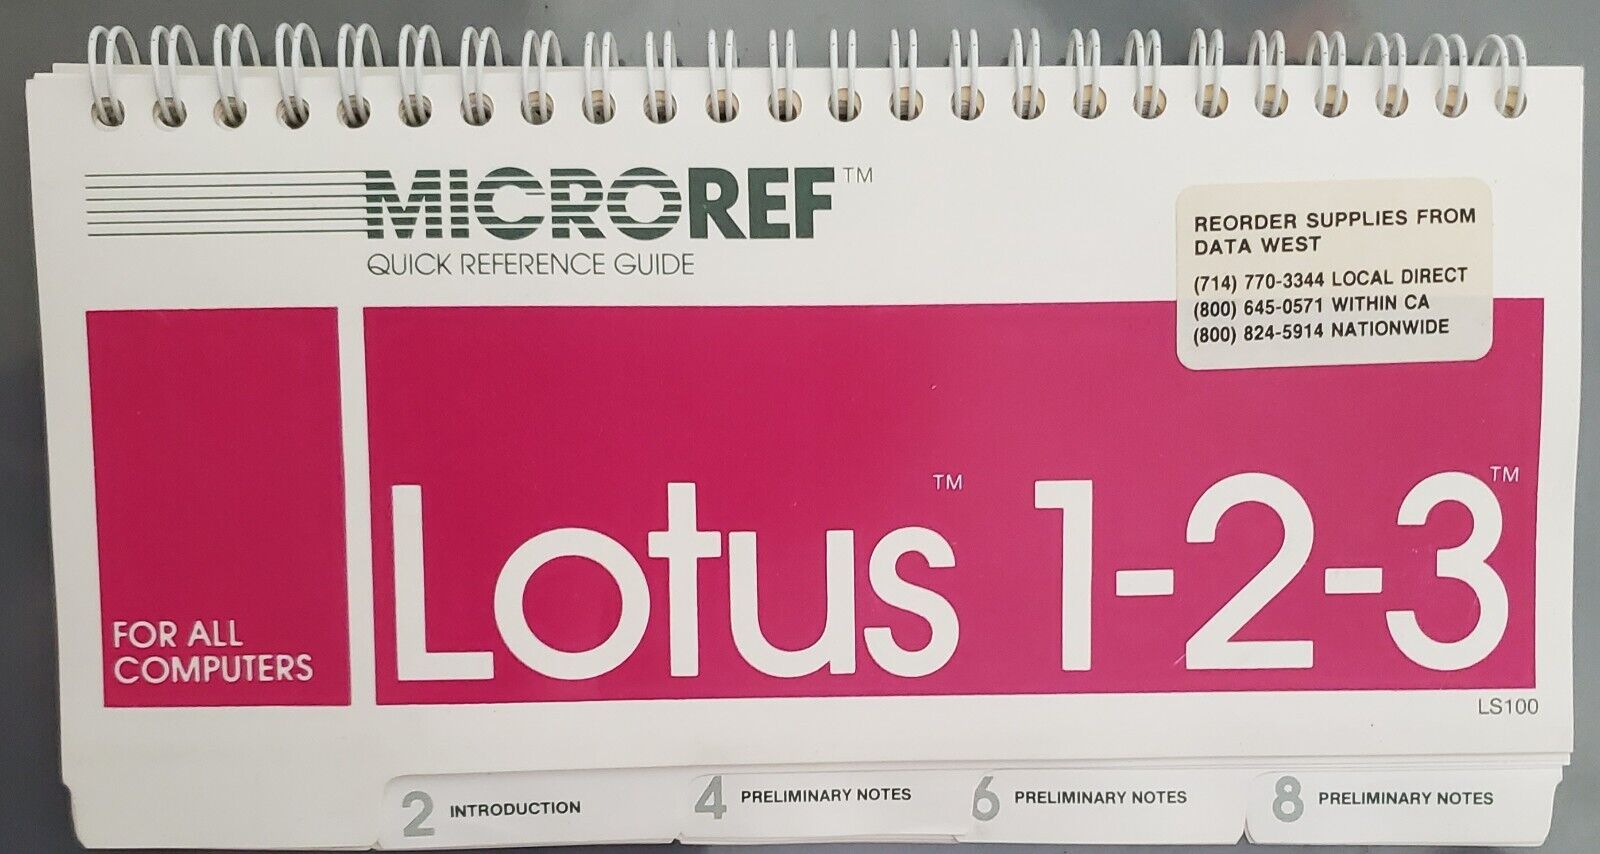 Rare Lotus 1-2-3 Quick Reference Guide Microref LS100 Vintage 1980s